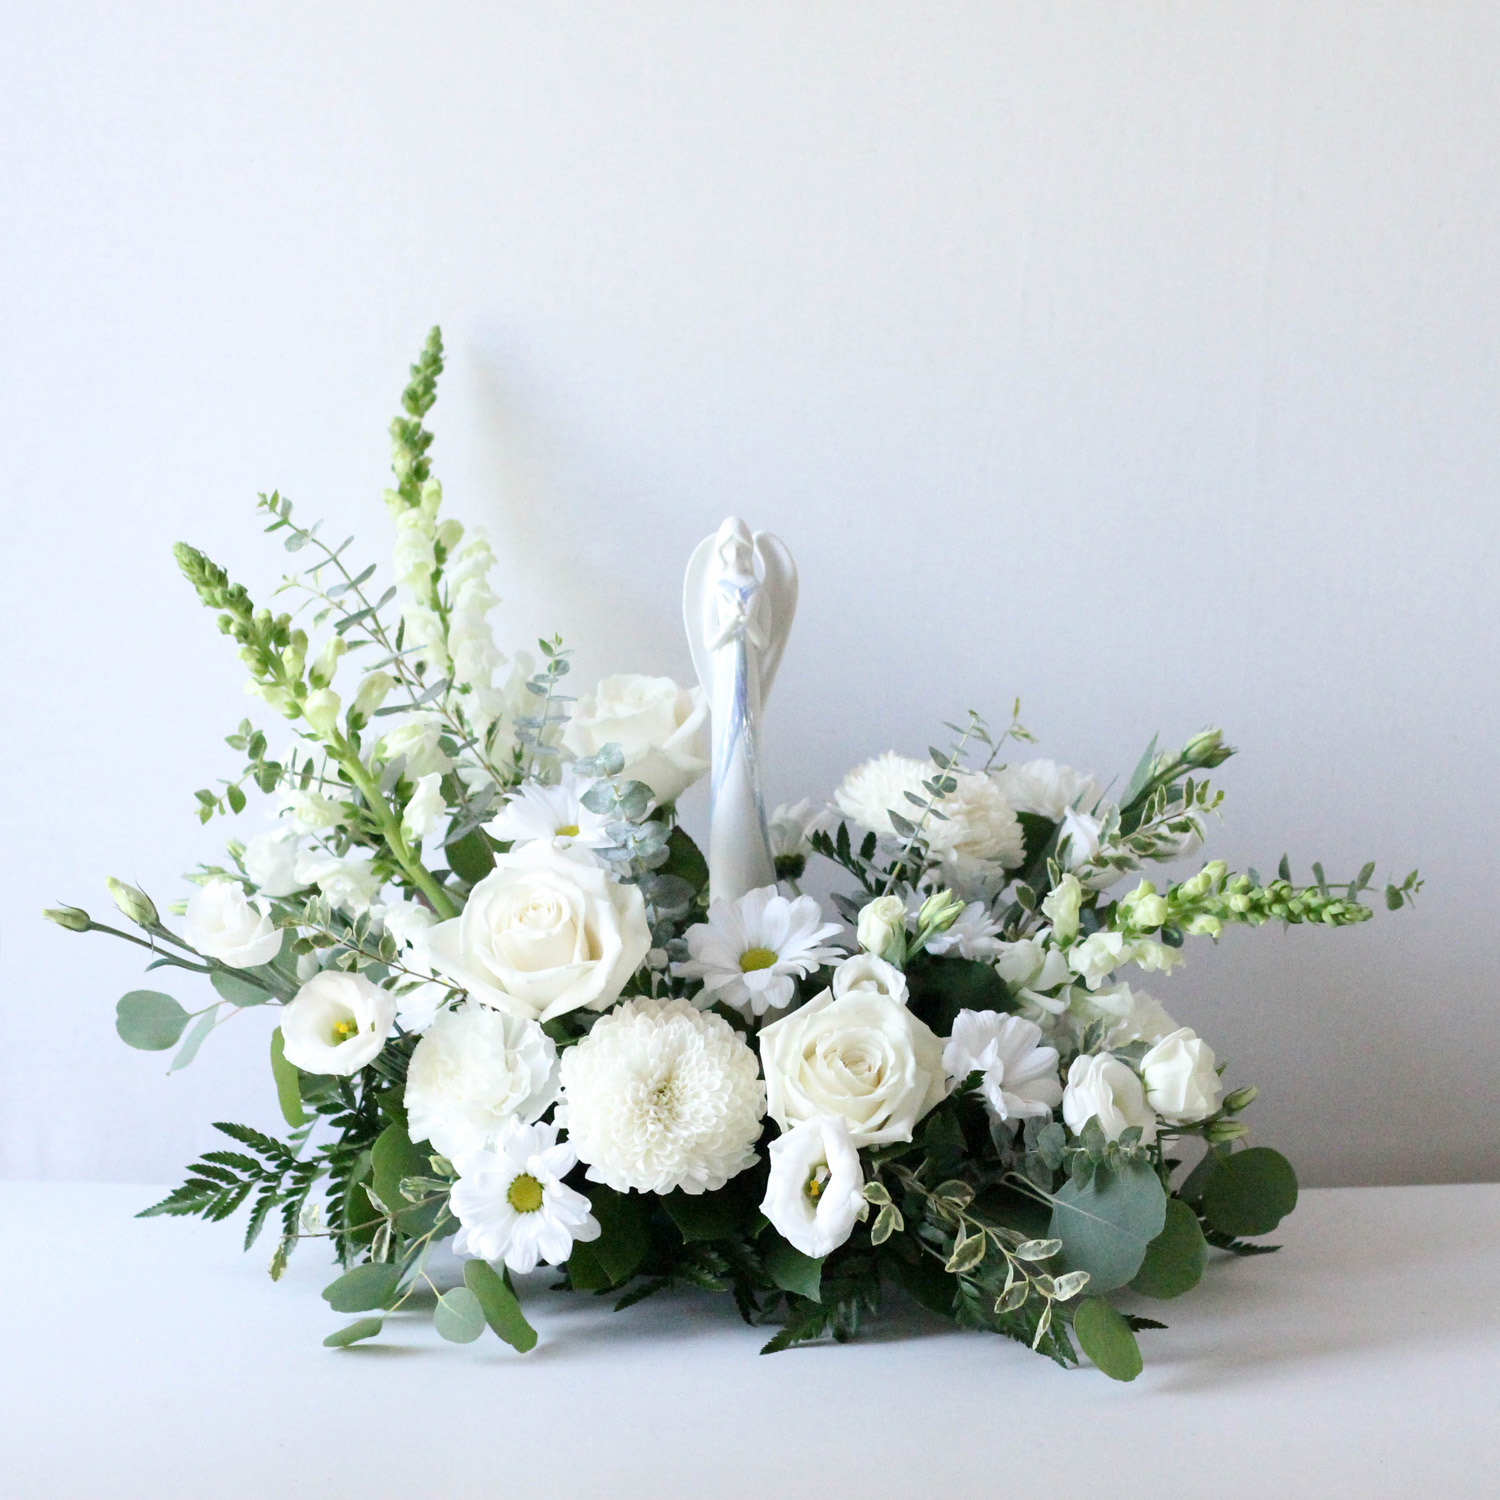 Mary - A lovely table top floral design with a ceramic Mary included